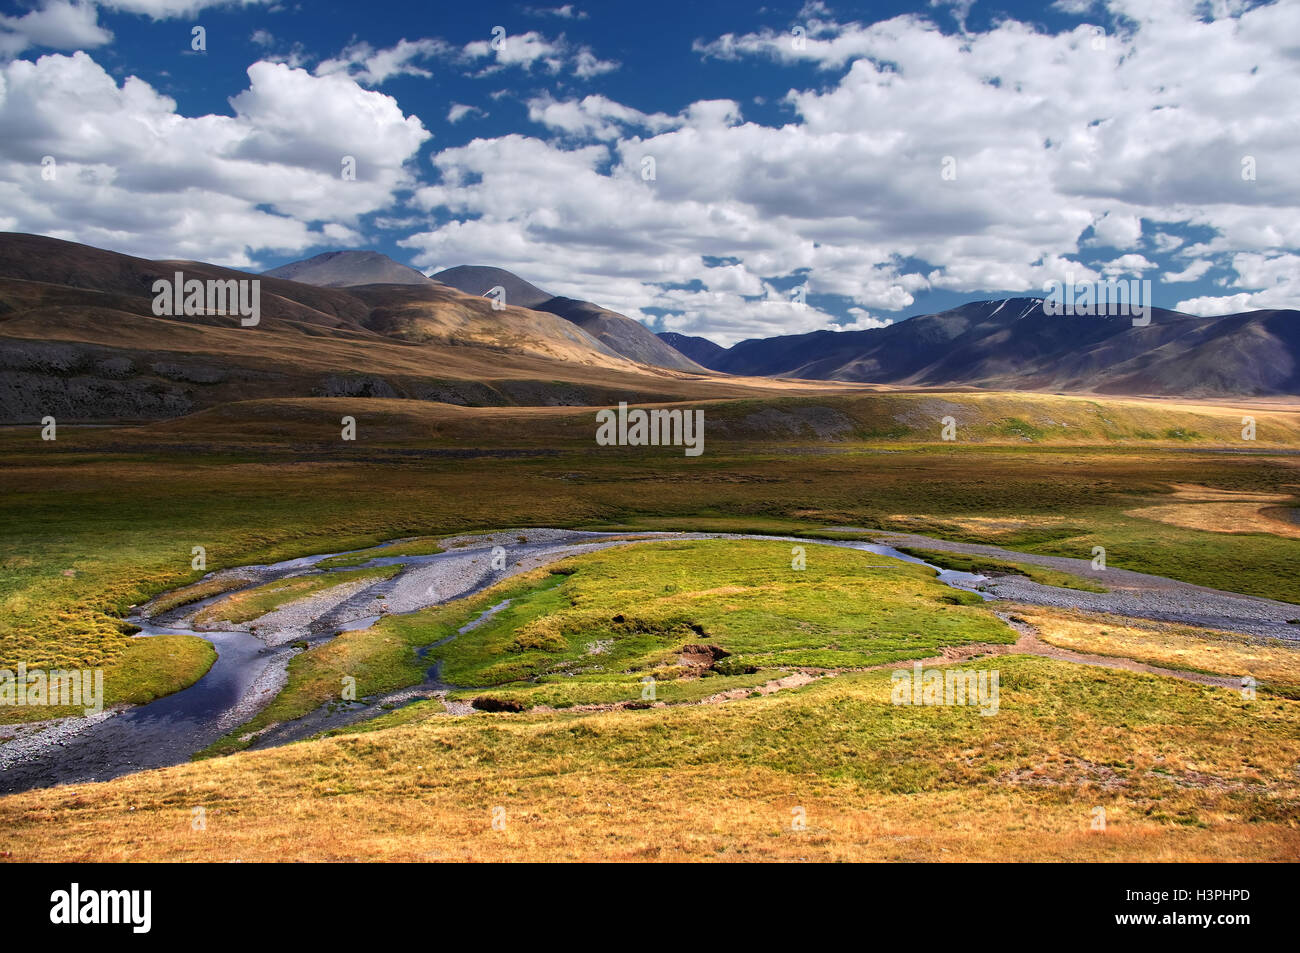 Valley of the mountain river among meadows with dry yellow grass on the highland steppe near Mongolia Plateau Ukok Altai Russia Stock Photo